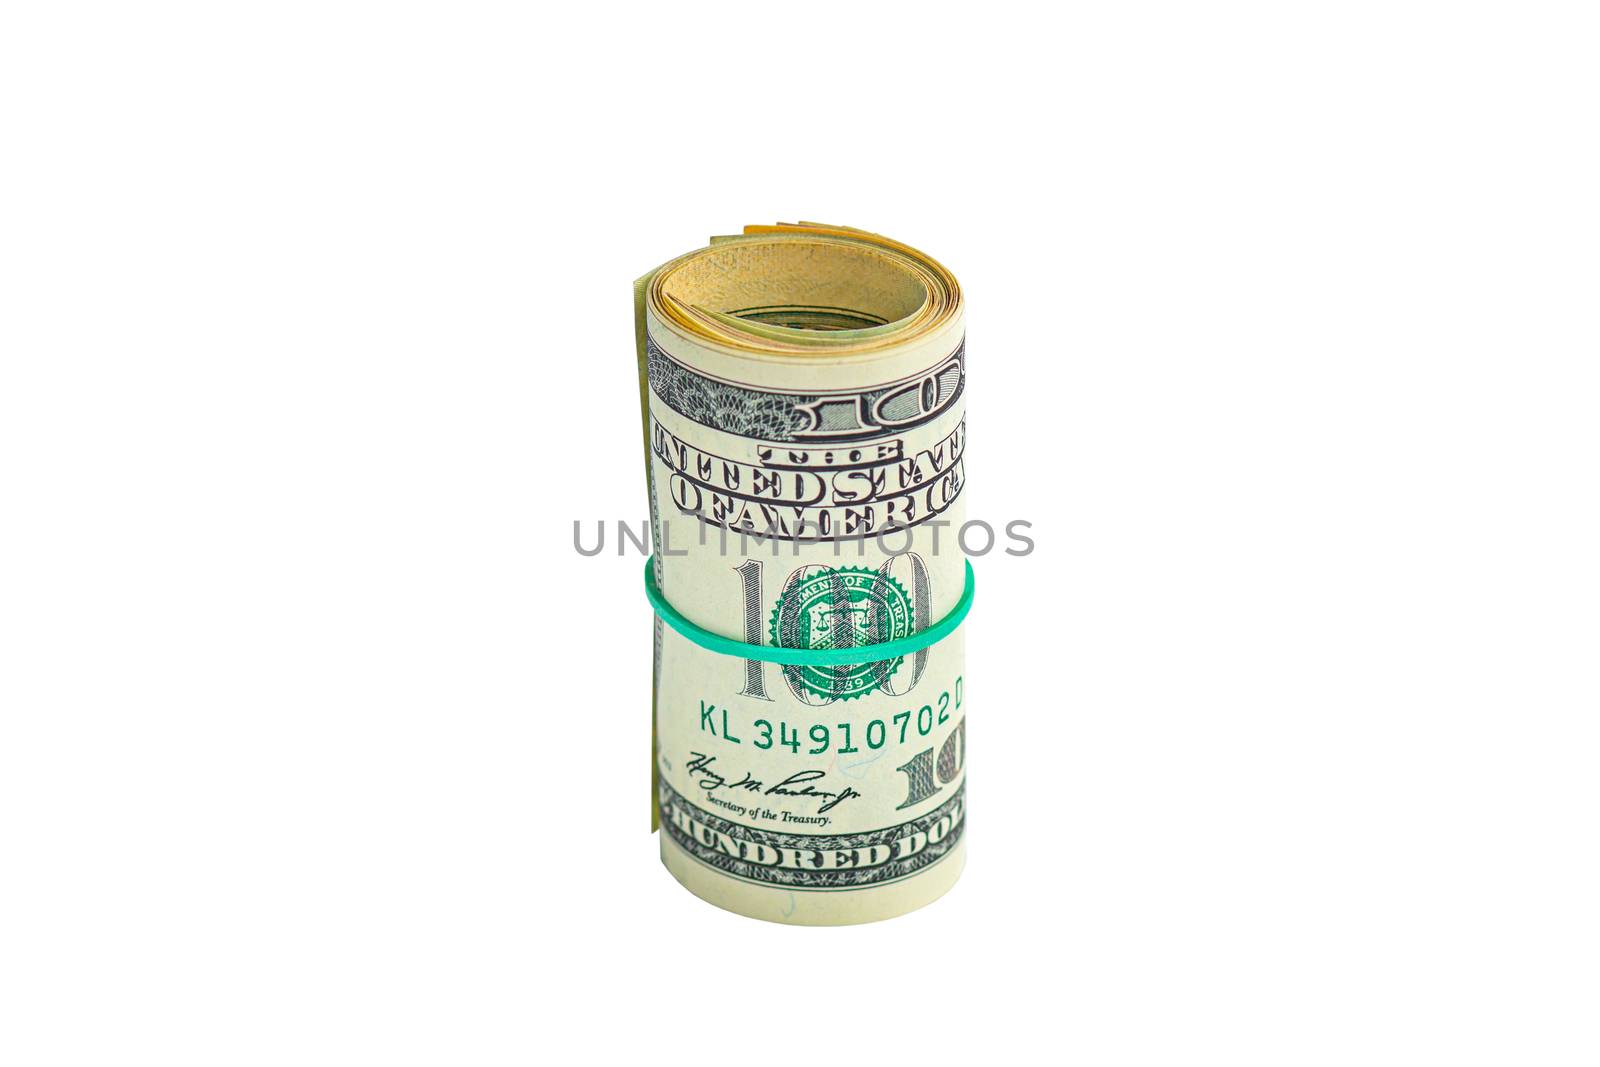 Money in a roll tied with an elastic band. The isolated object on a white background. Close up photo of money. U.S. dollars. Banknotes. Paper money isolated on white background.